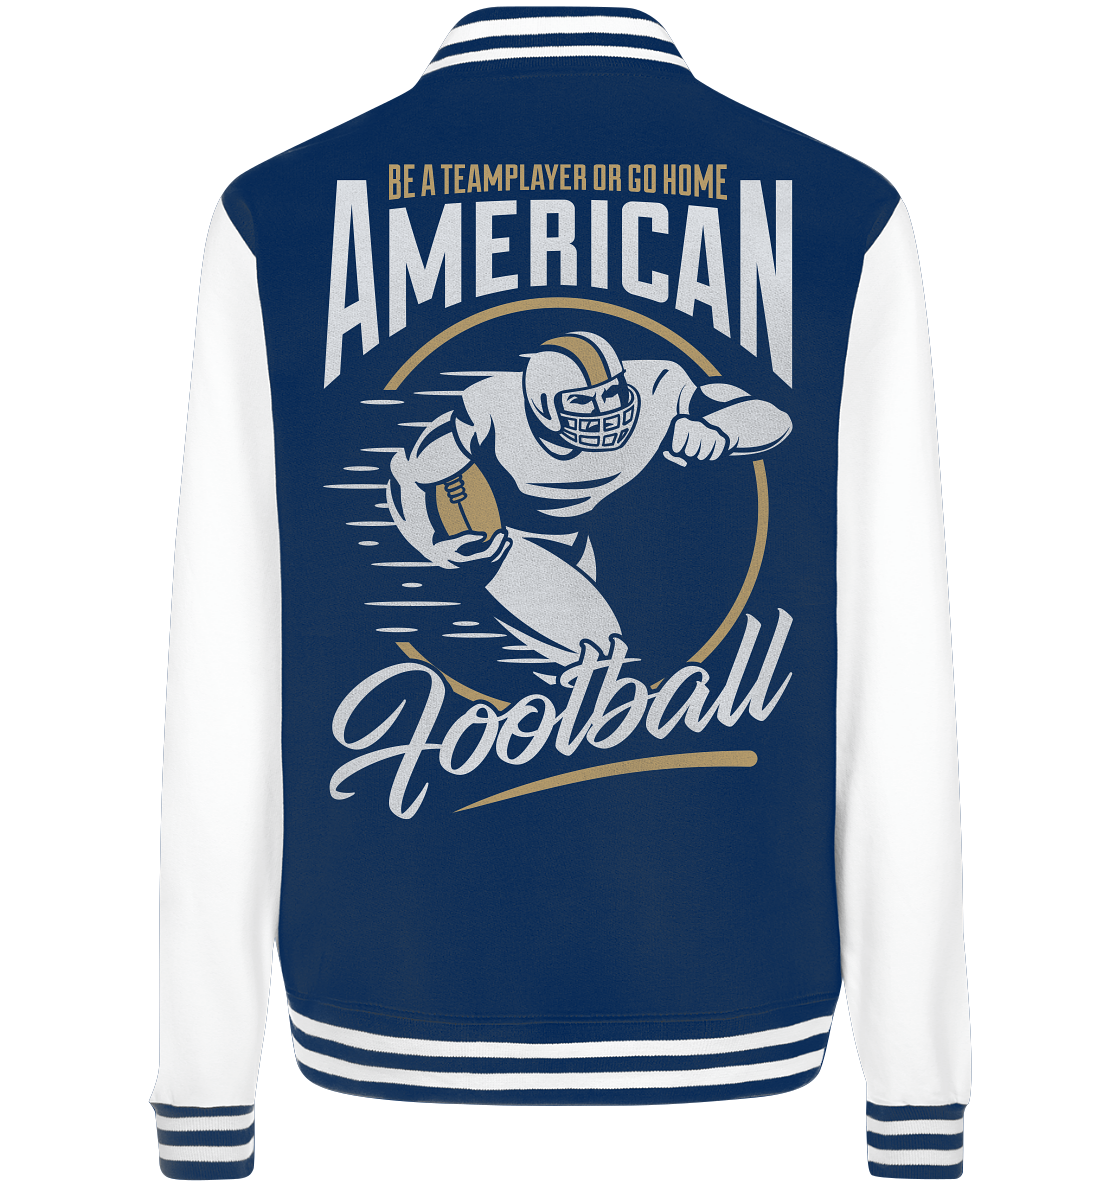 Teamplayer American Football - College Jacket - Football Unity Football Unity